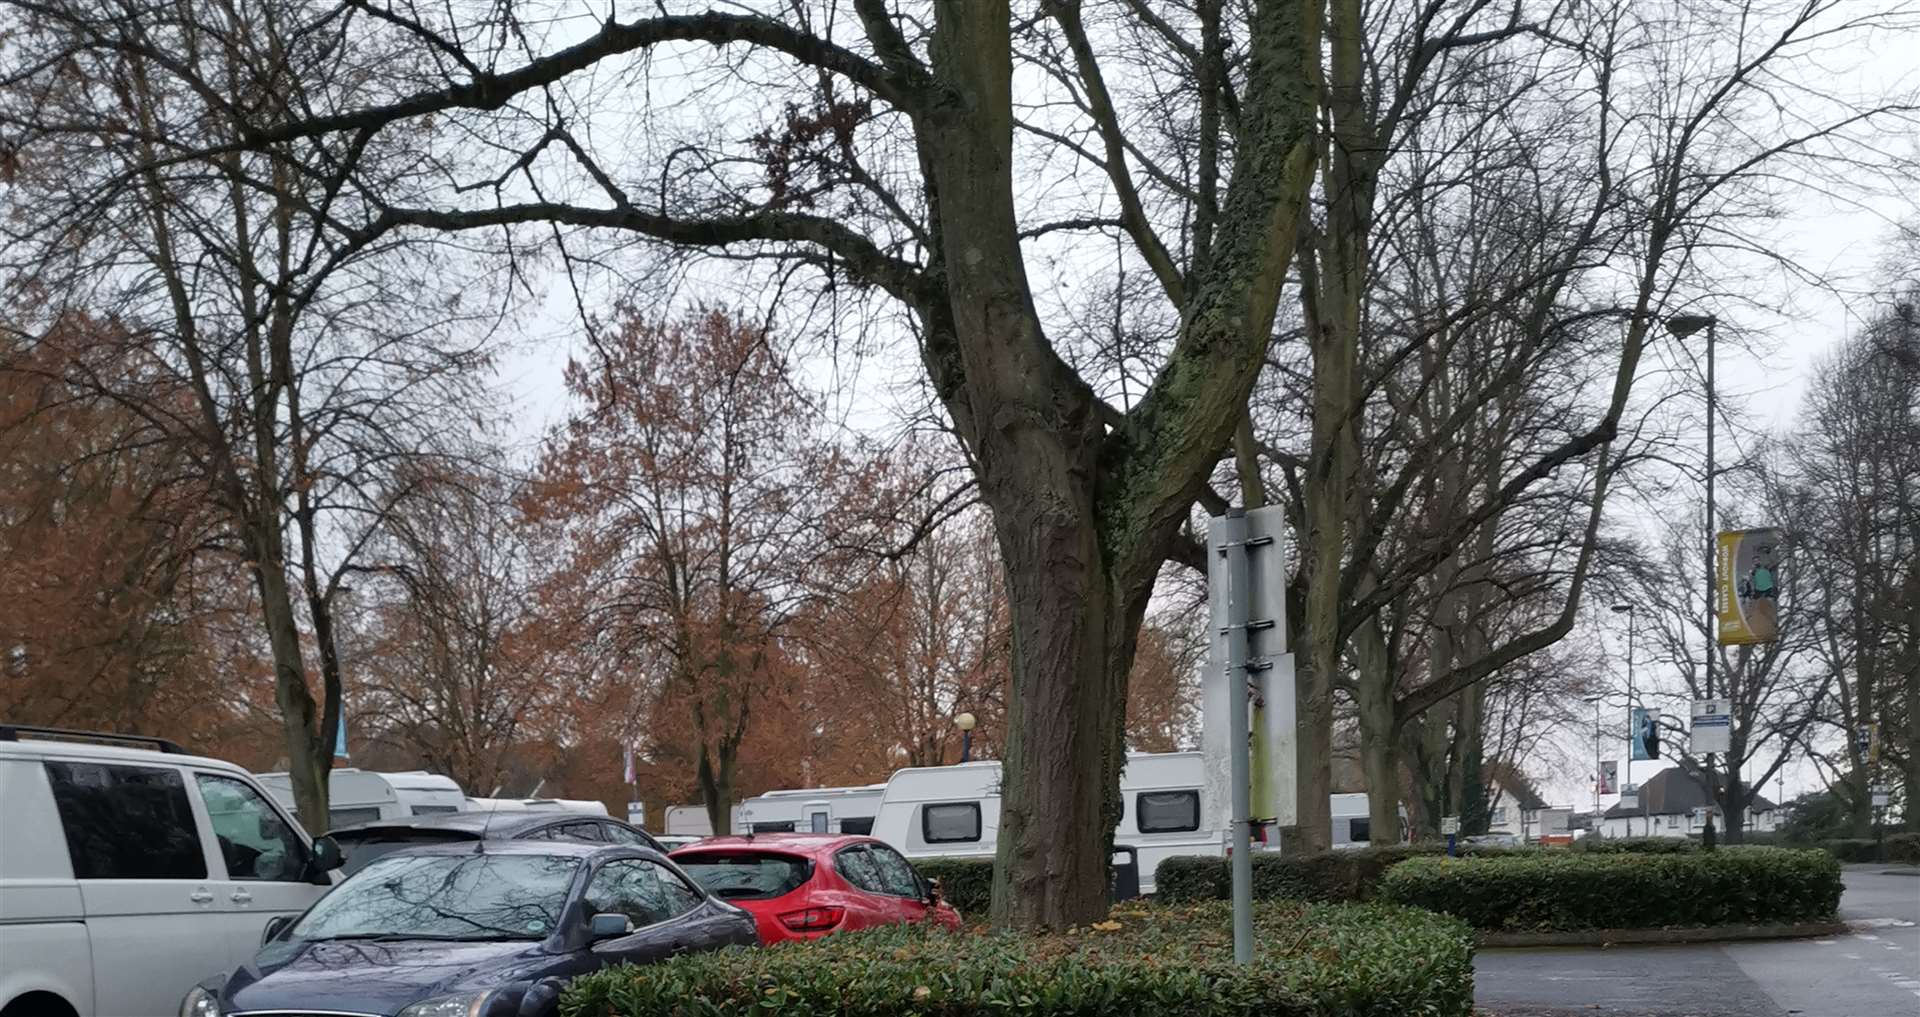 Travellers spotted at Moat Park in Maidstone